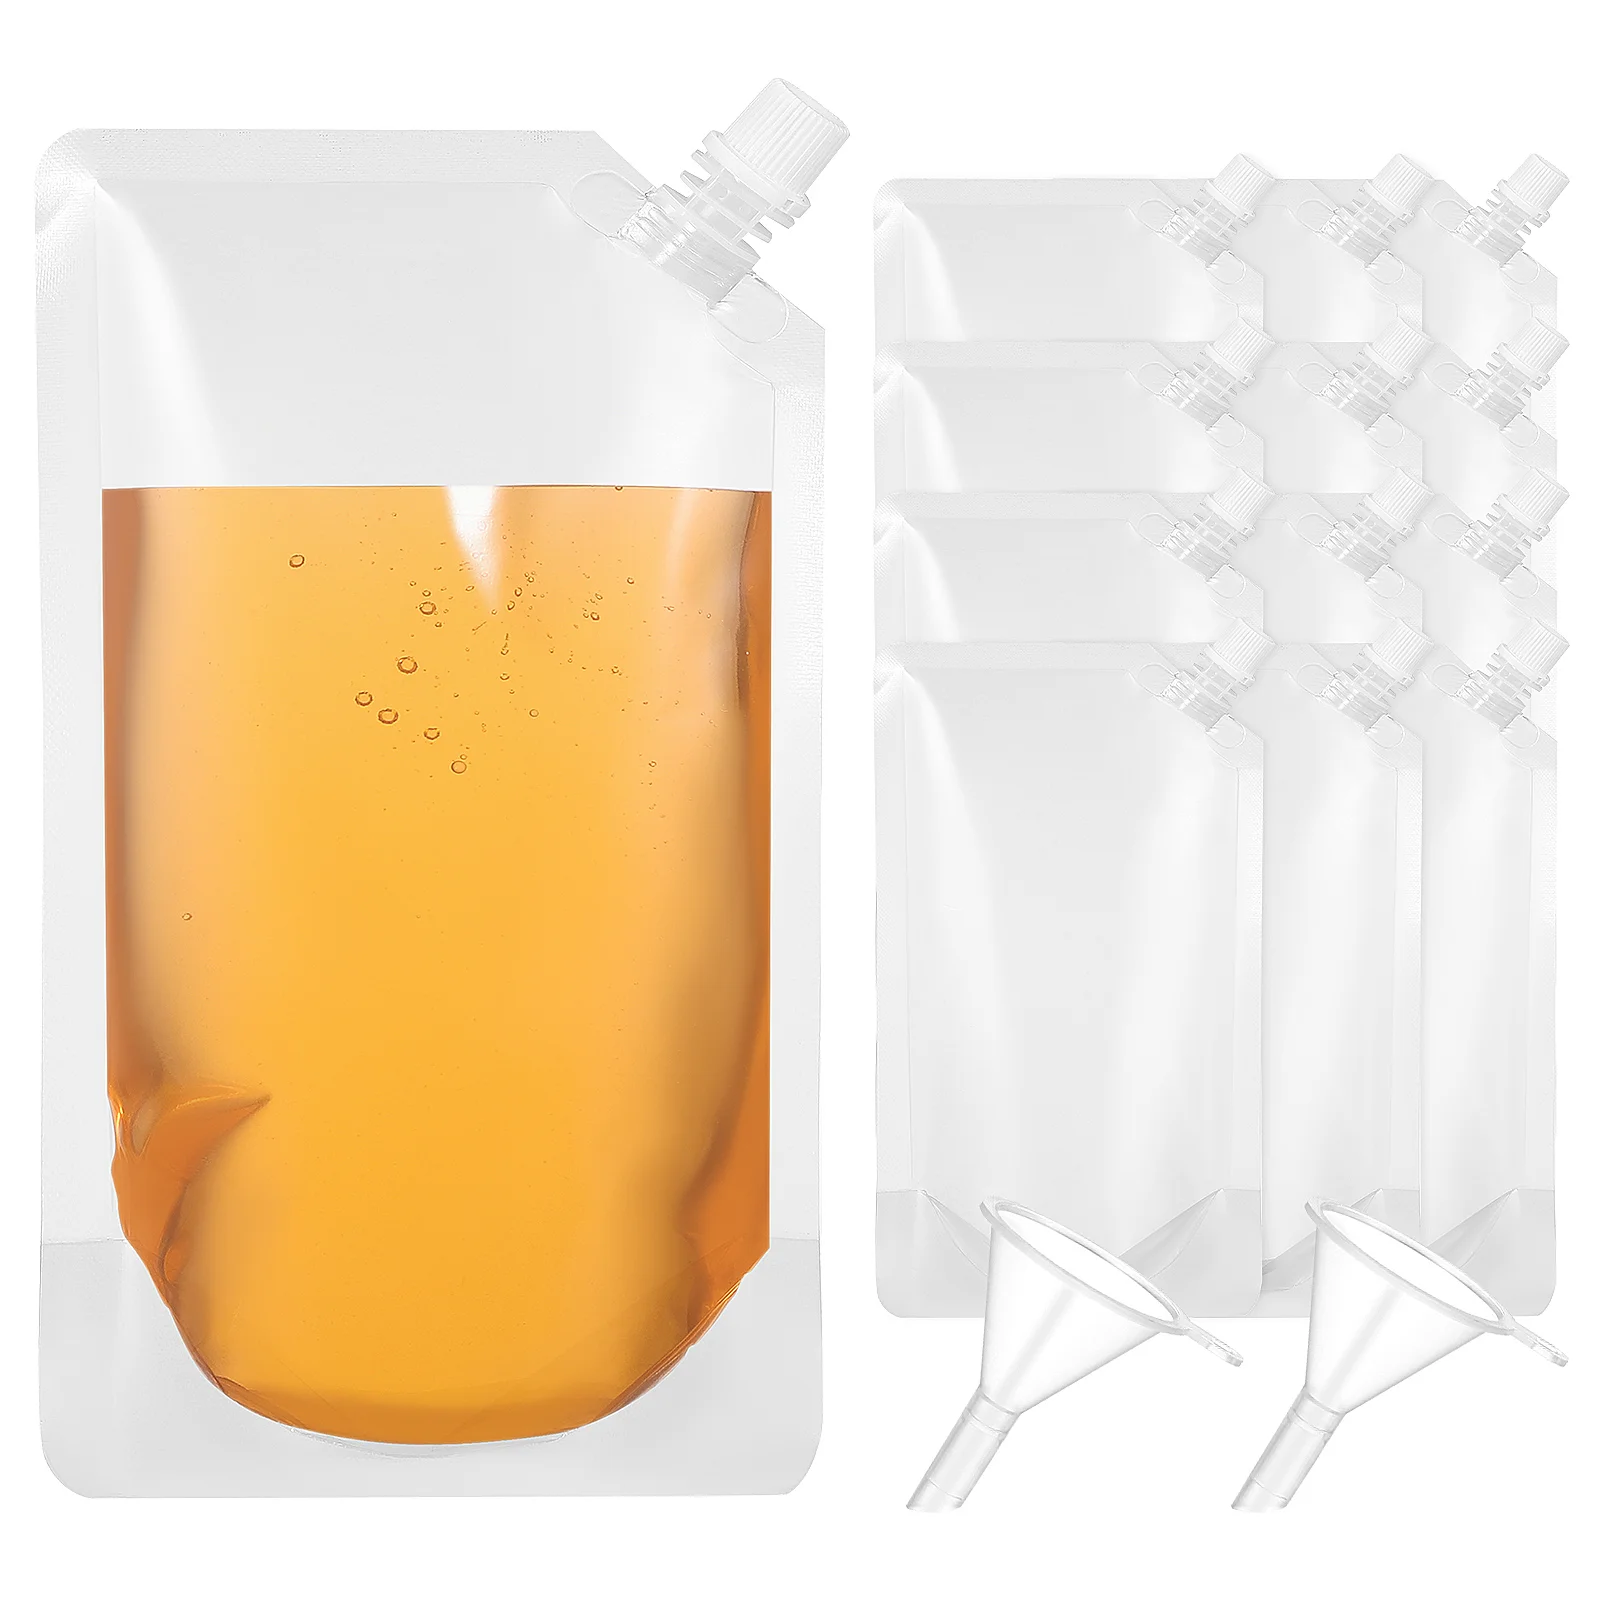 

12Pcs Plastic Drink Flasks 500ml Refillable Drink Pouches Juice Bags with Funnels for Hot Cold Beverage